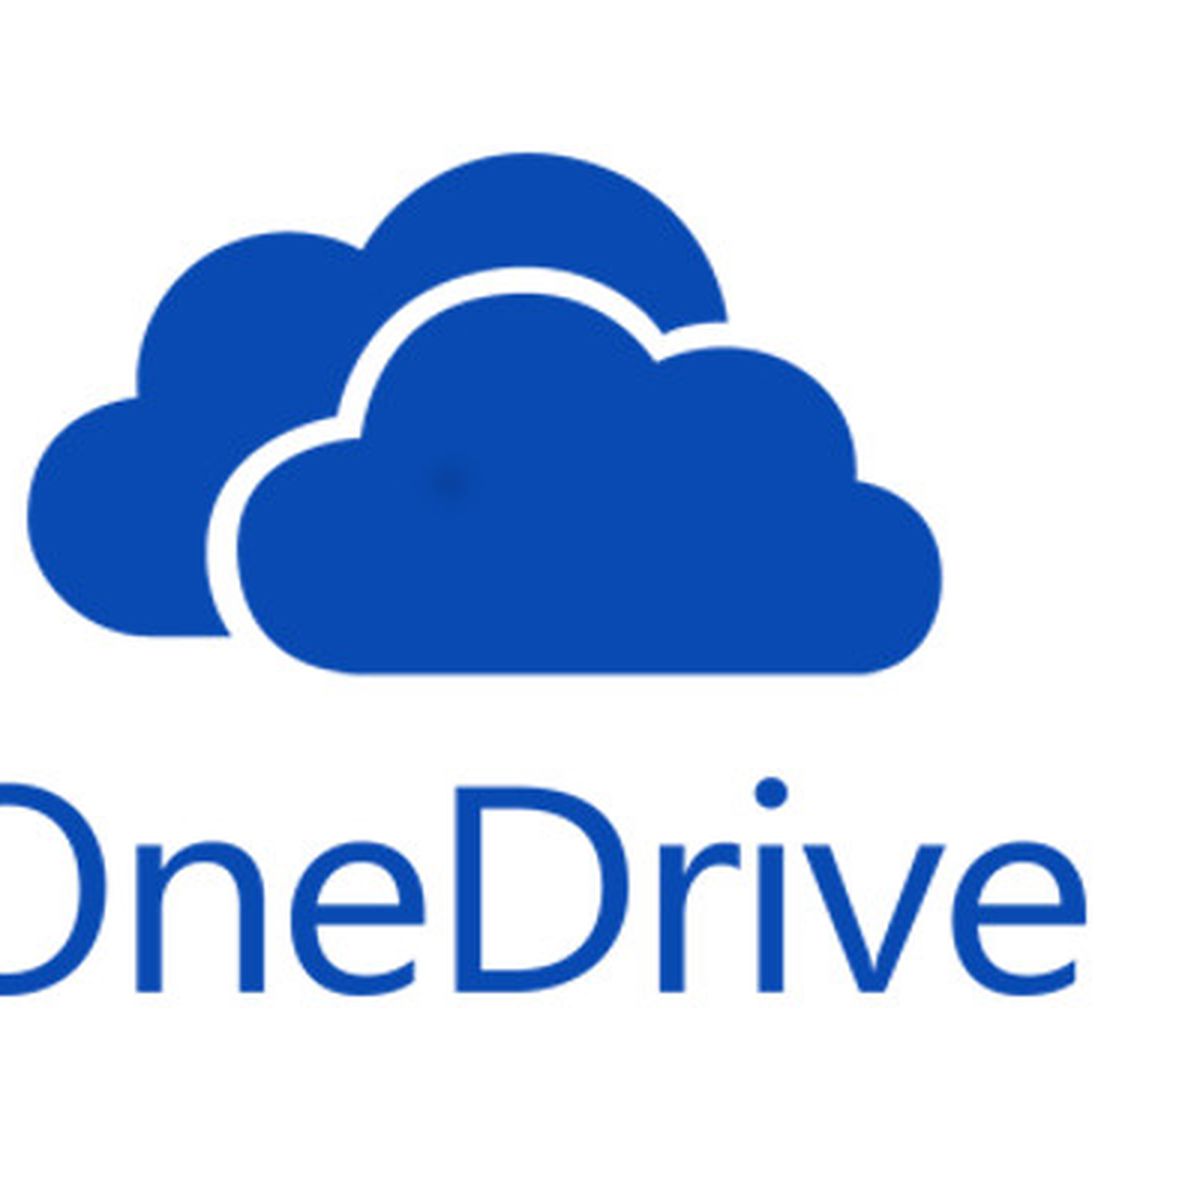 install onedrive for business on windows 8